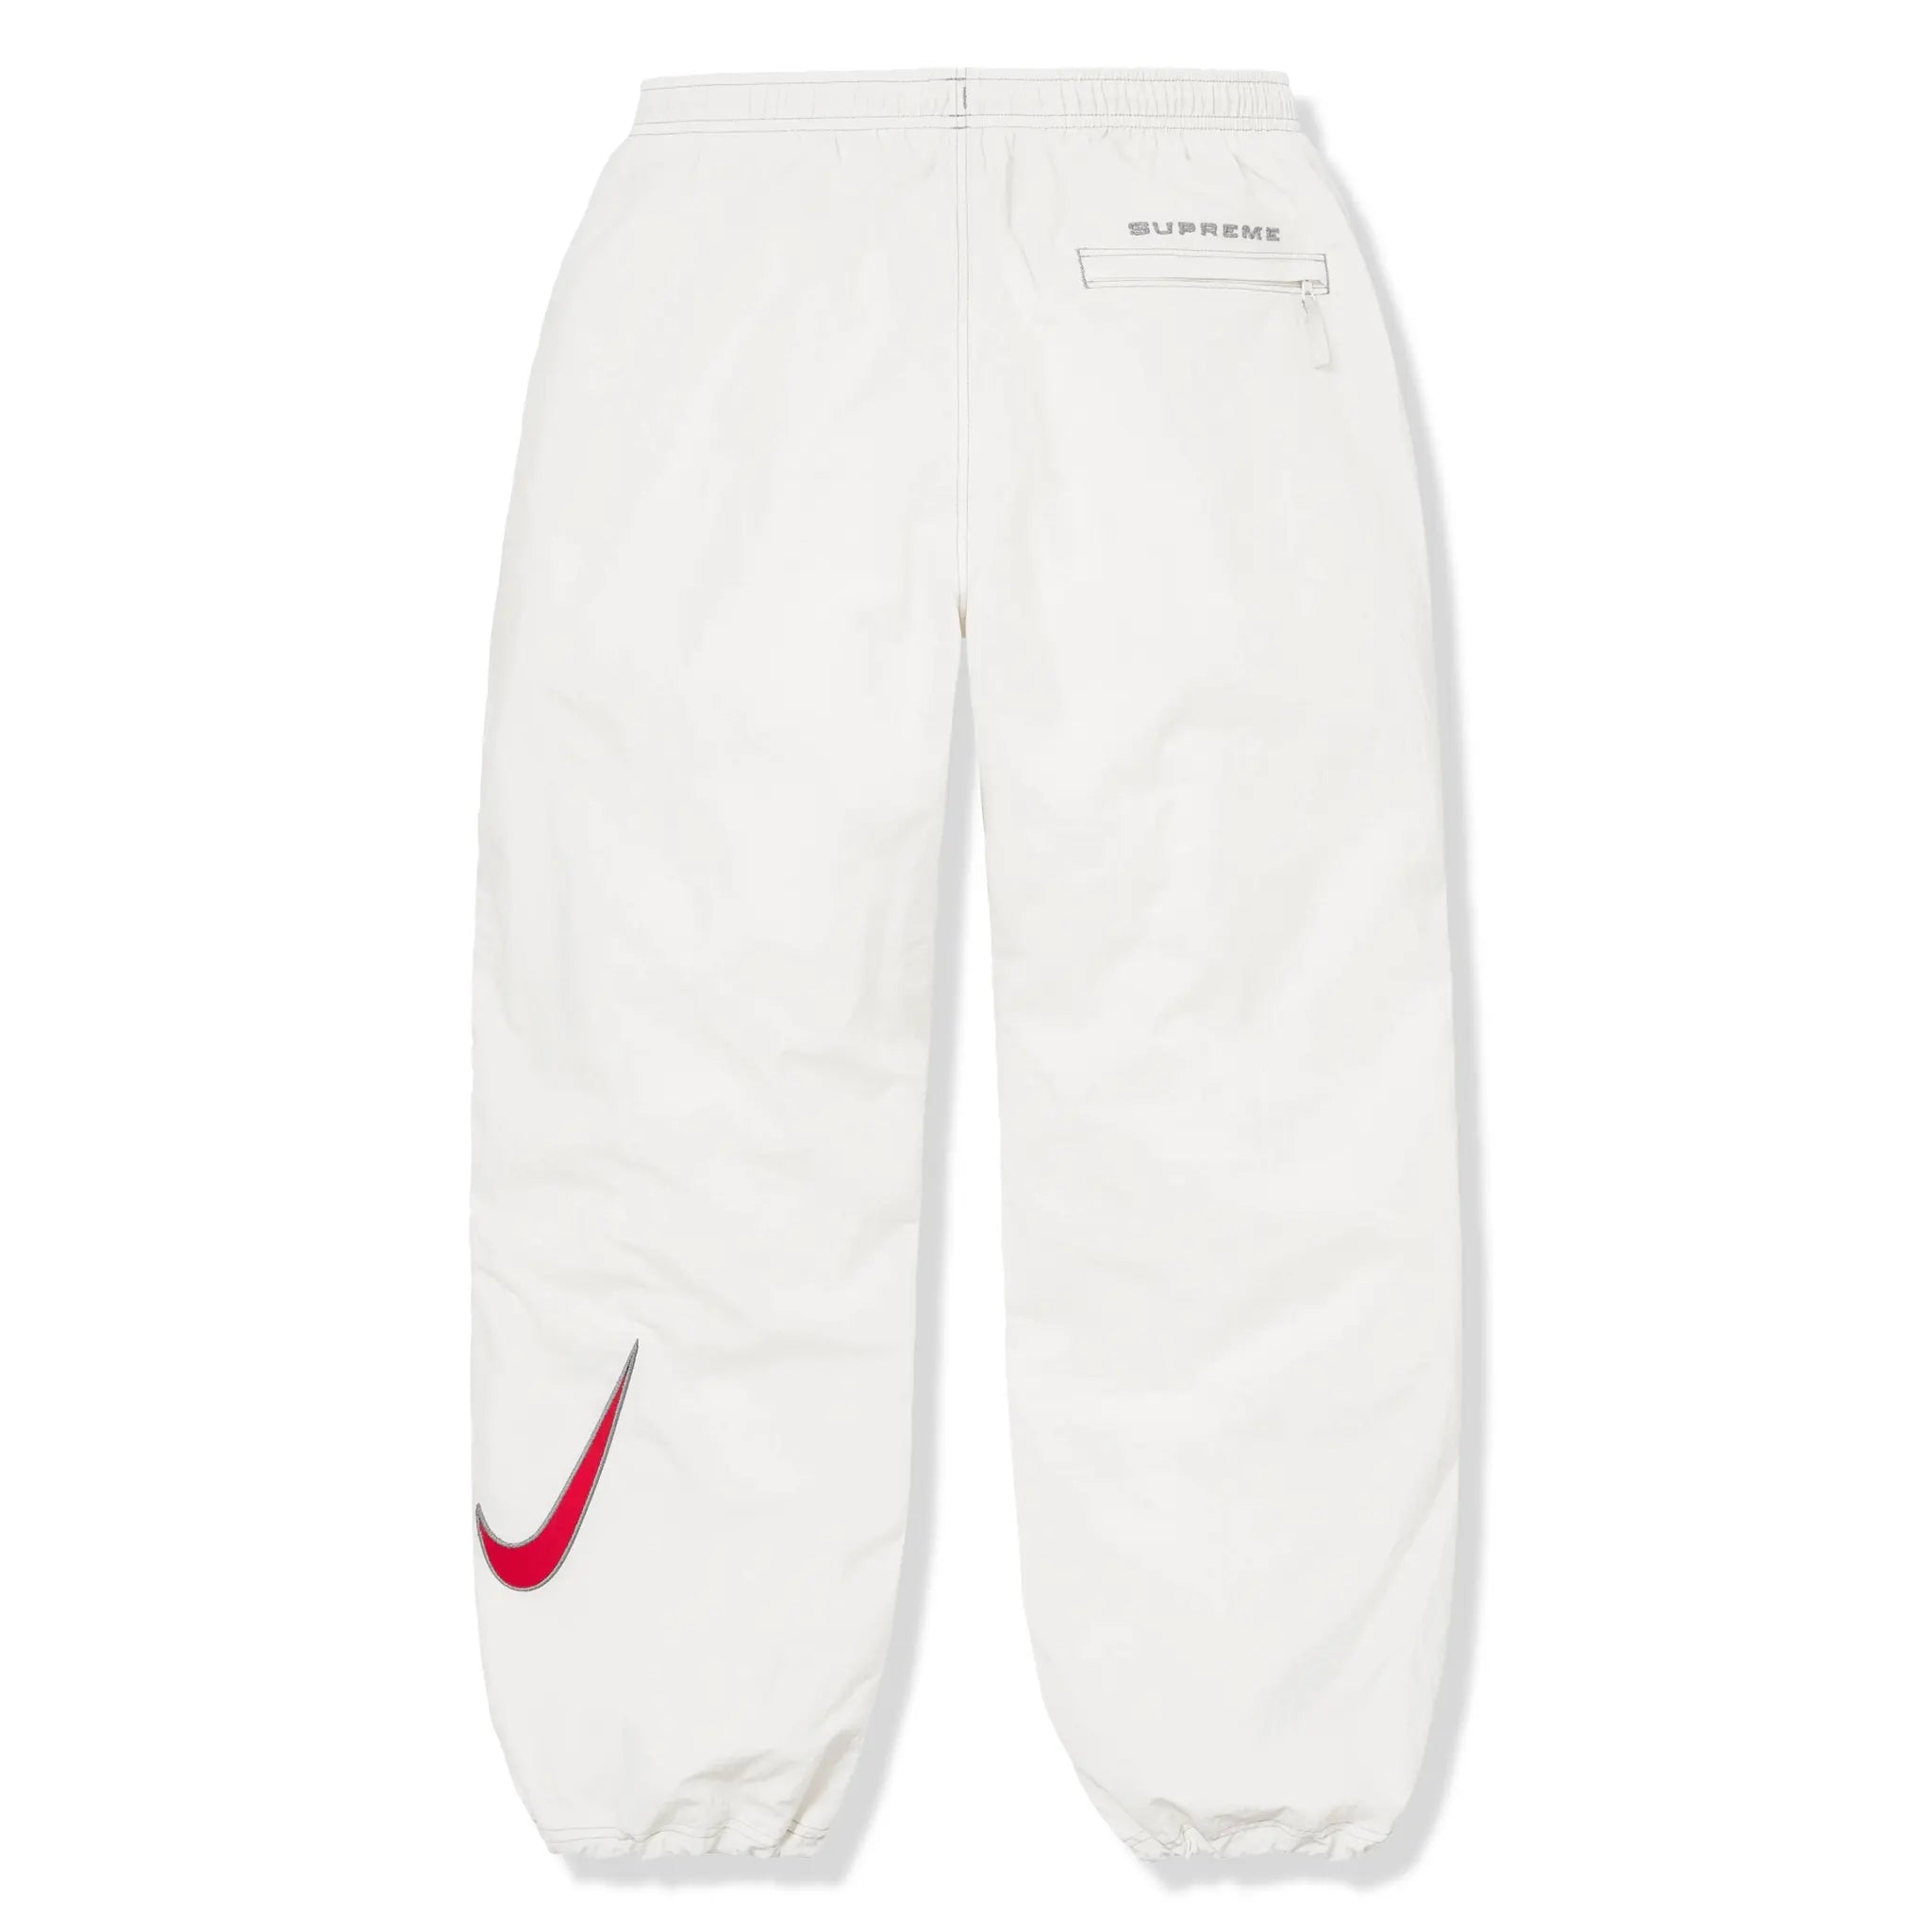 Back view of Nike Supreme Ripstop White Track Pants